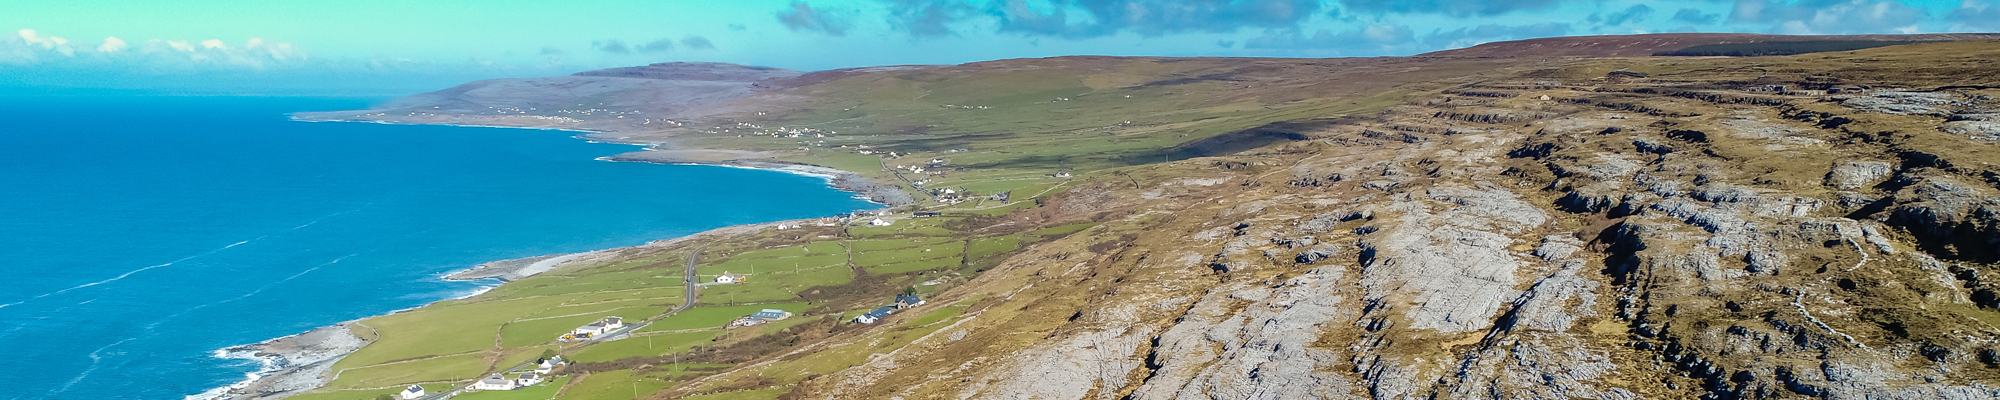 Aerial view over Fanore and Blackhead